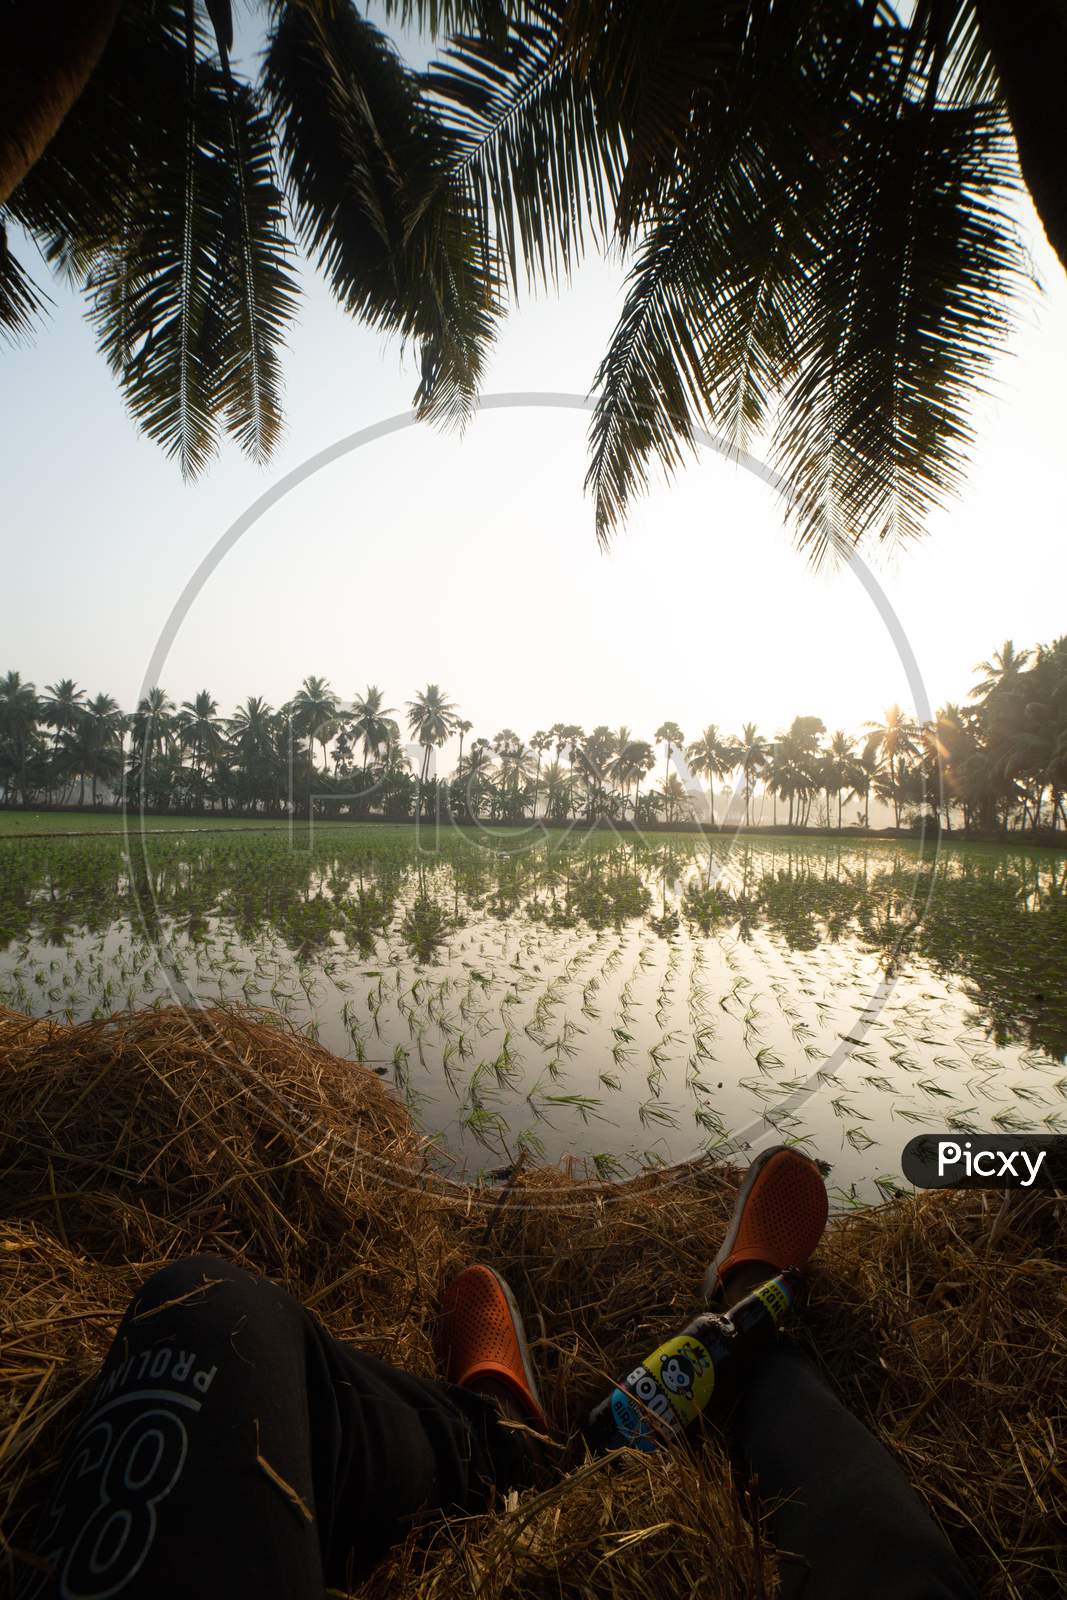 Indian man enjoying the sunrise by the paddy fields